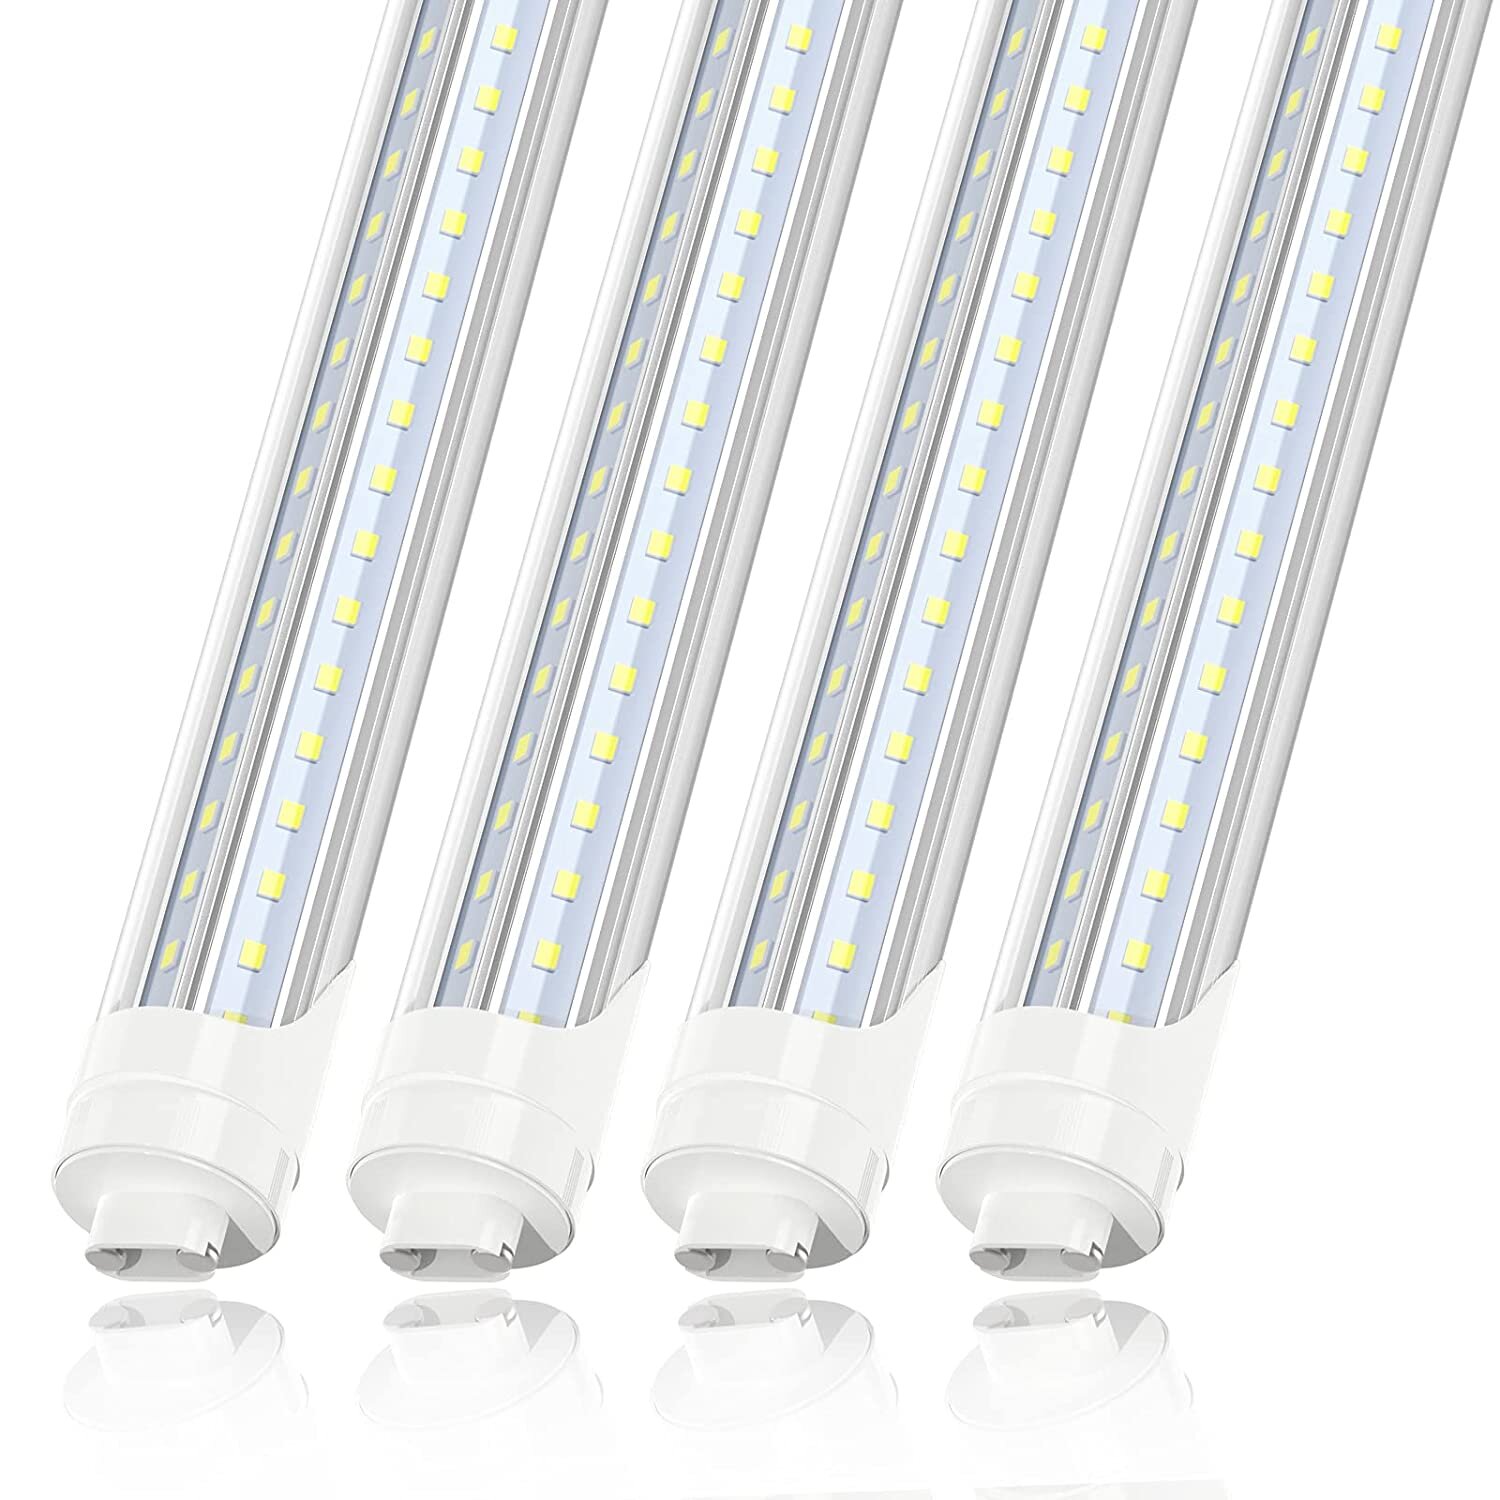 Details about   4~20 Pack T8 8FT Integrated LED Tube Light Bulbs 72W 6500K 8' Shop light Fixture 